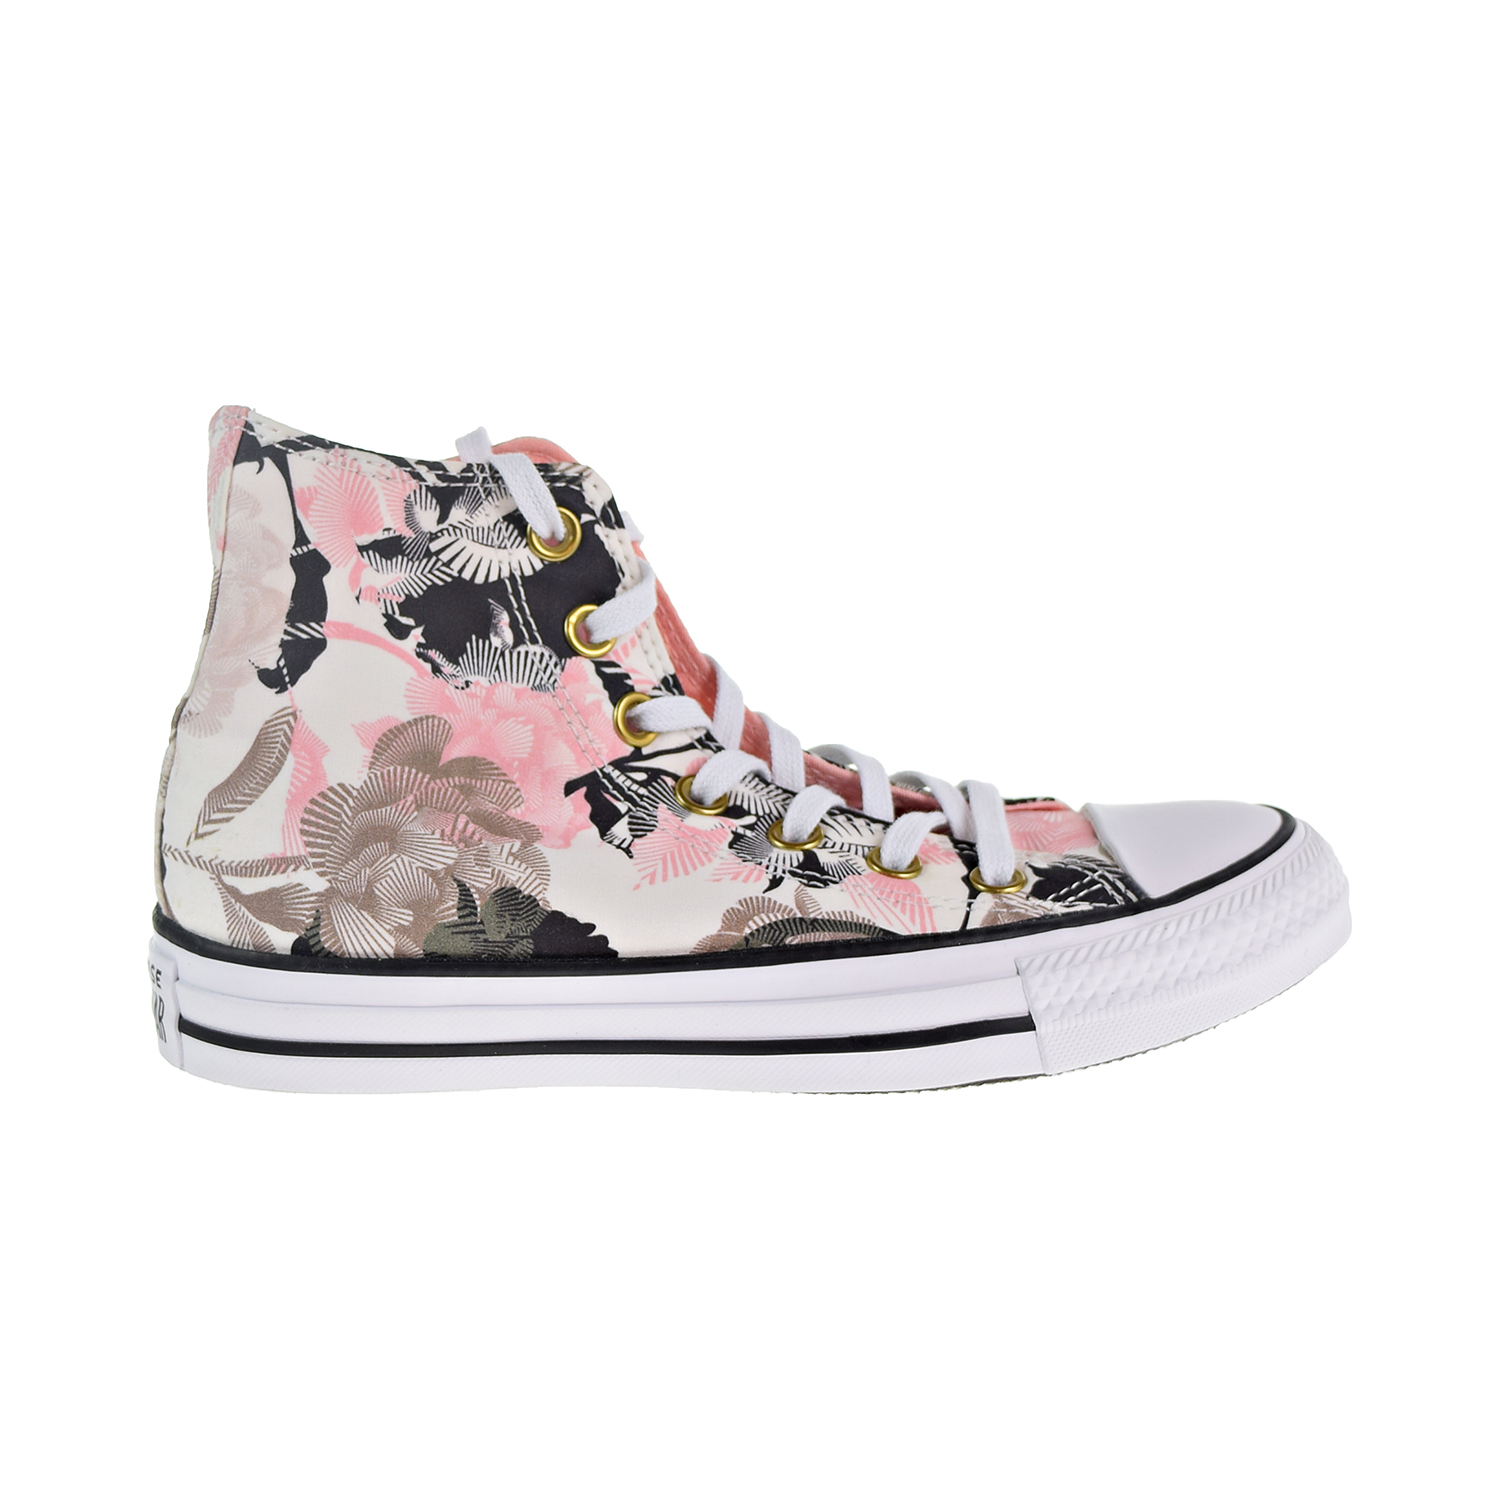 Converse Chuck Taylor All Star Floral Women's Shoes White/Storm Pink/Black  561640f